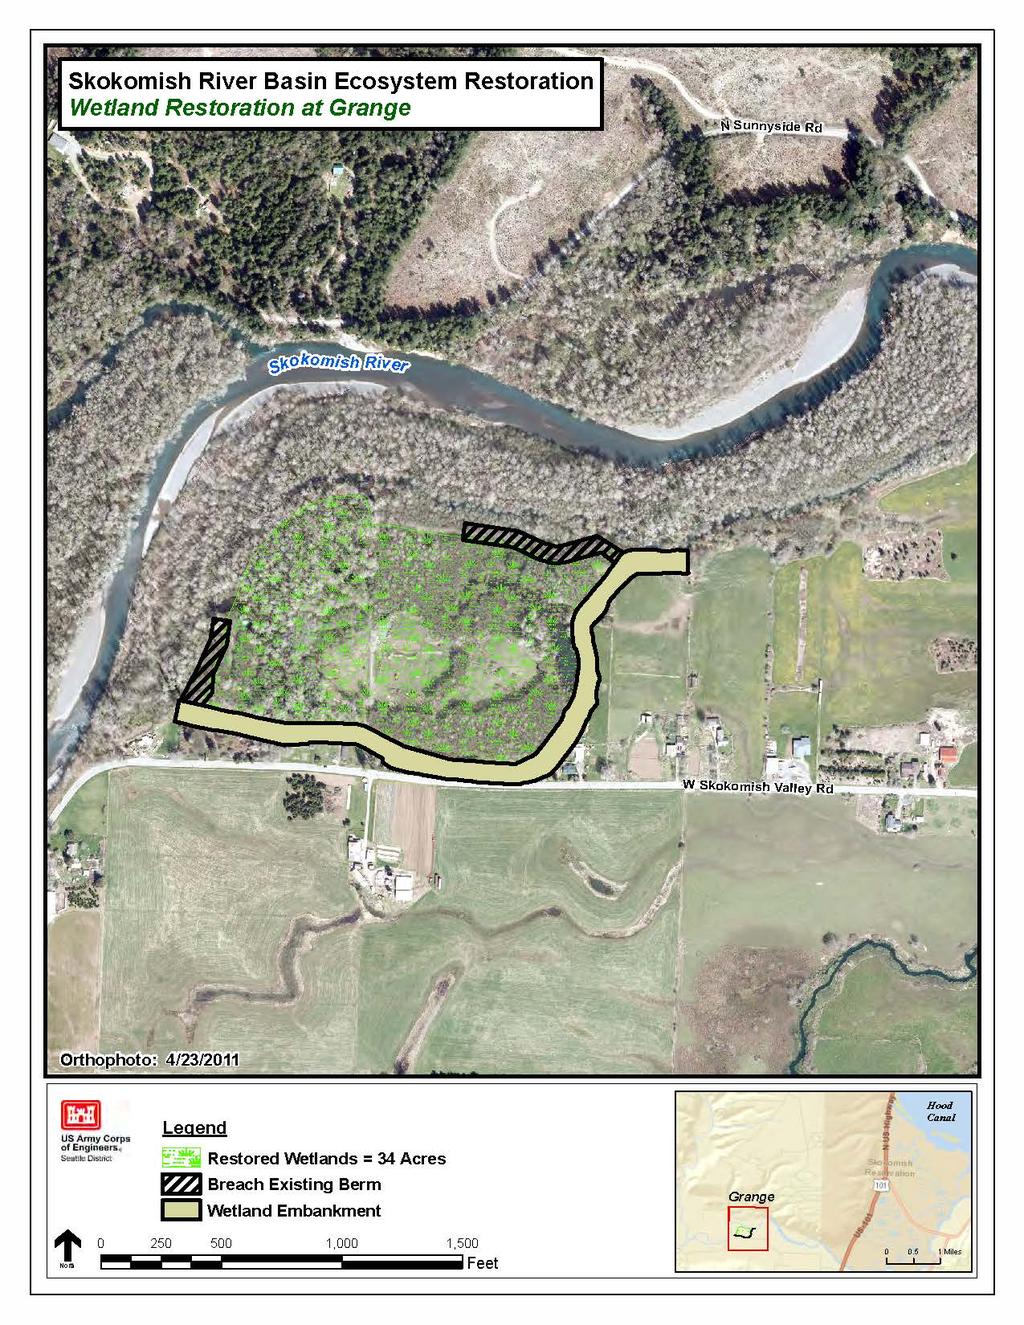 Recommended Plan Features Wetland Restoration at Grange Benefits Reconnection and restoration of